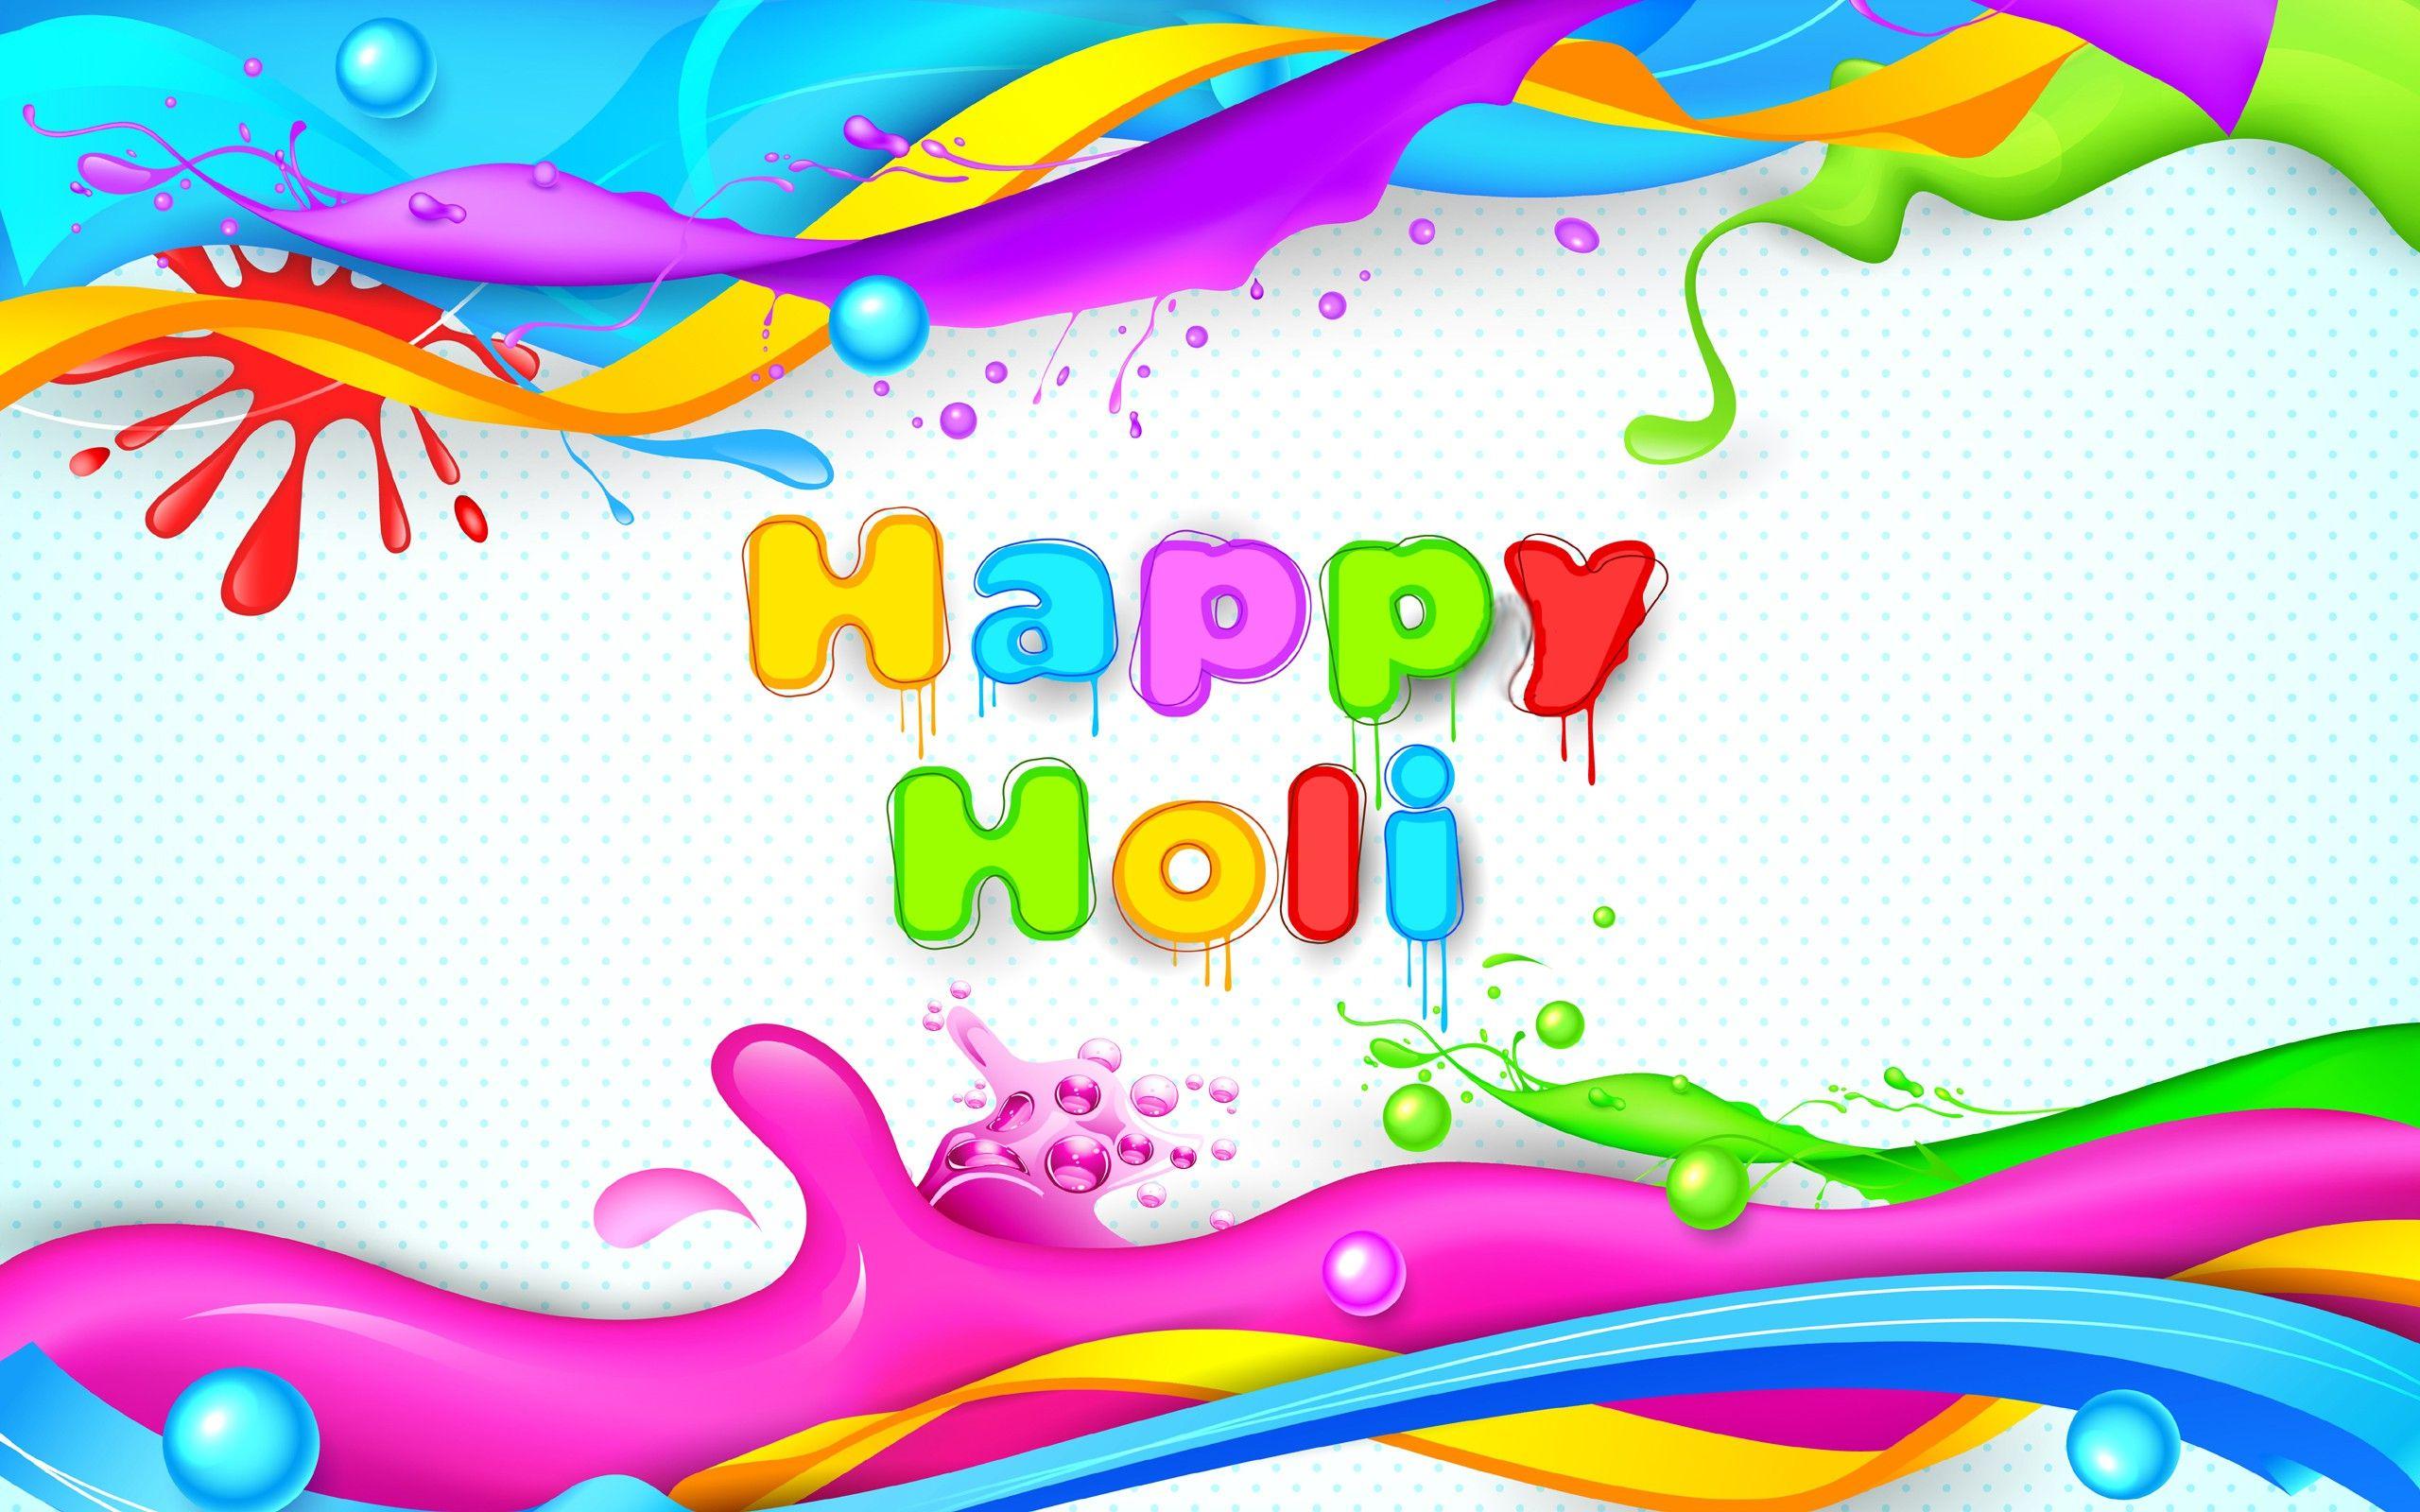 Happy Holi Photo Image Picture & Wallpaper For Everyone